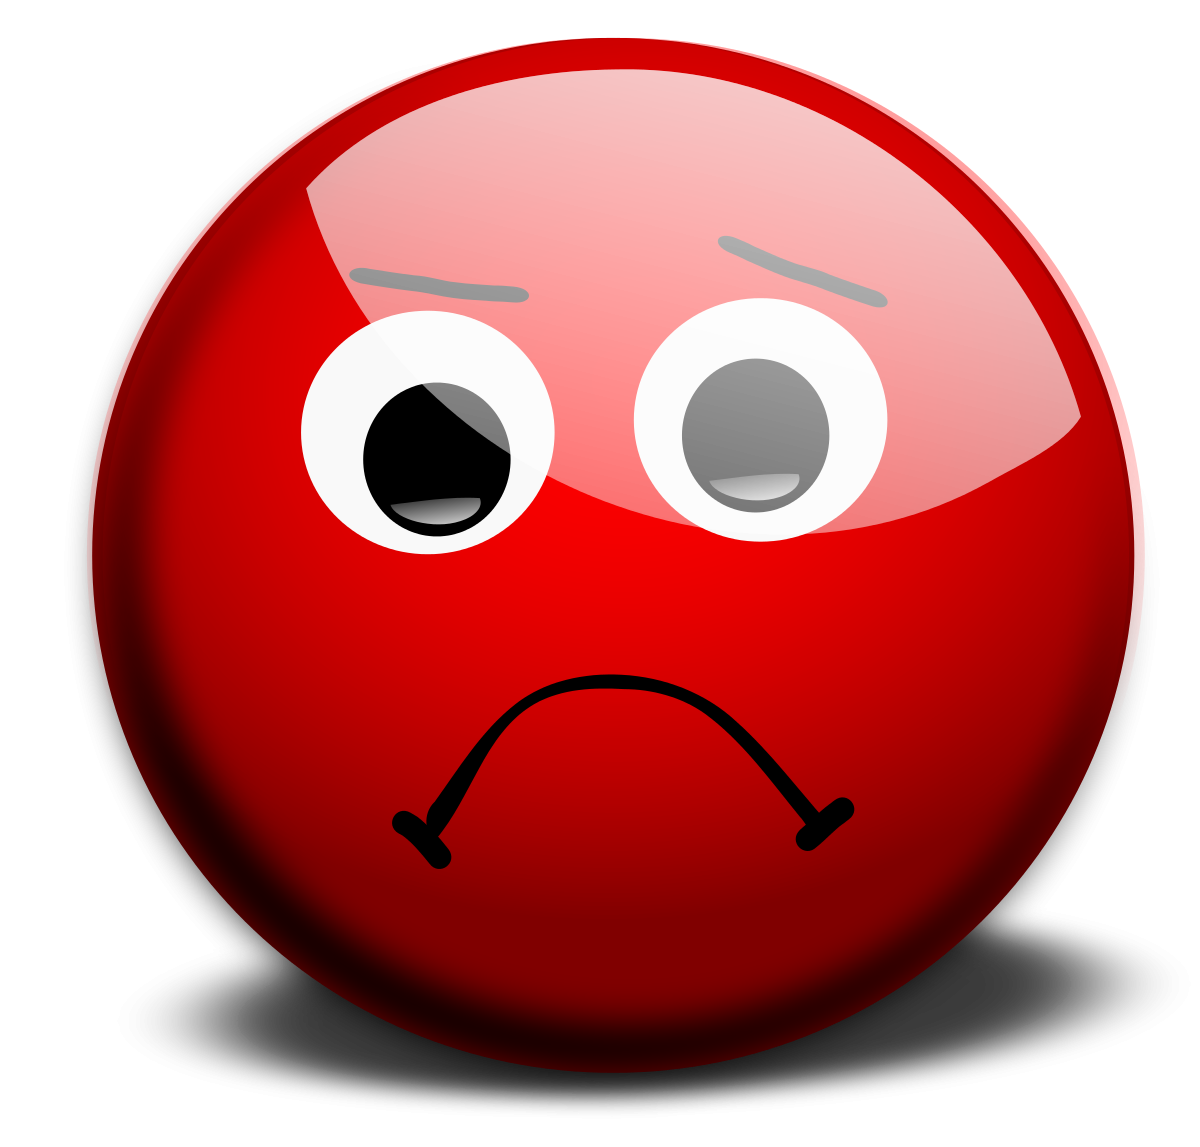 Sad Face Clipart by morkaitehred : Smiley Cliparts #19069- ClipartSE